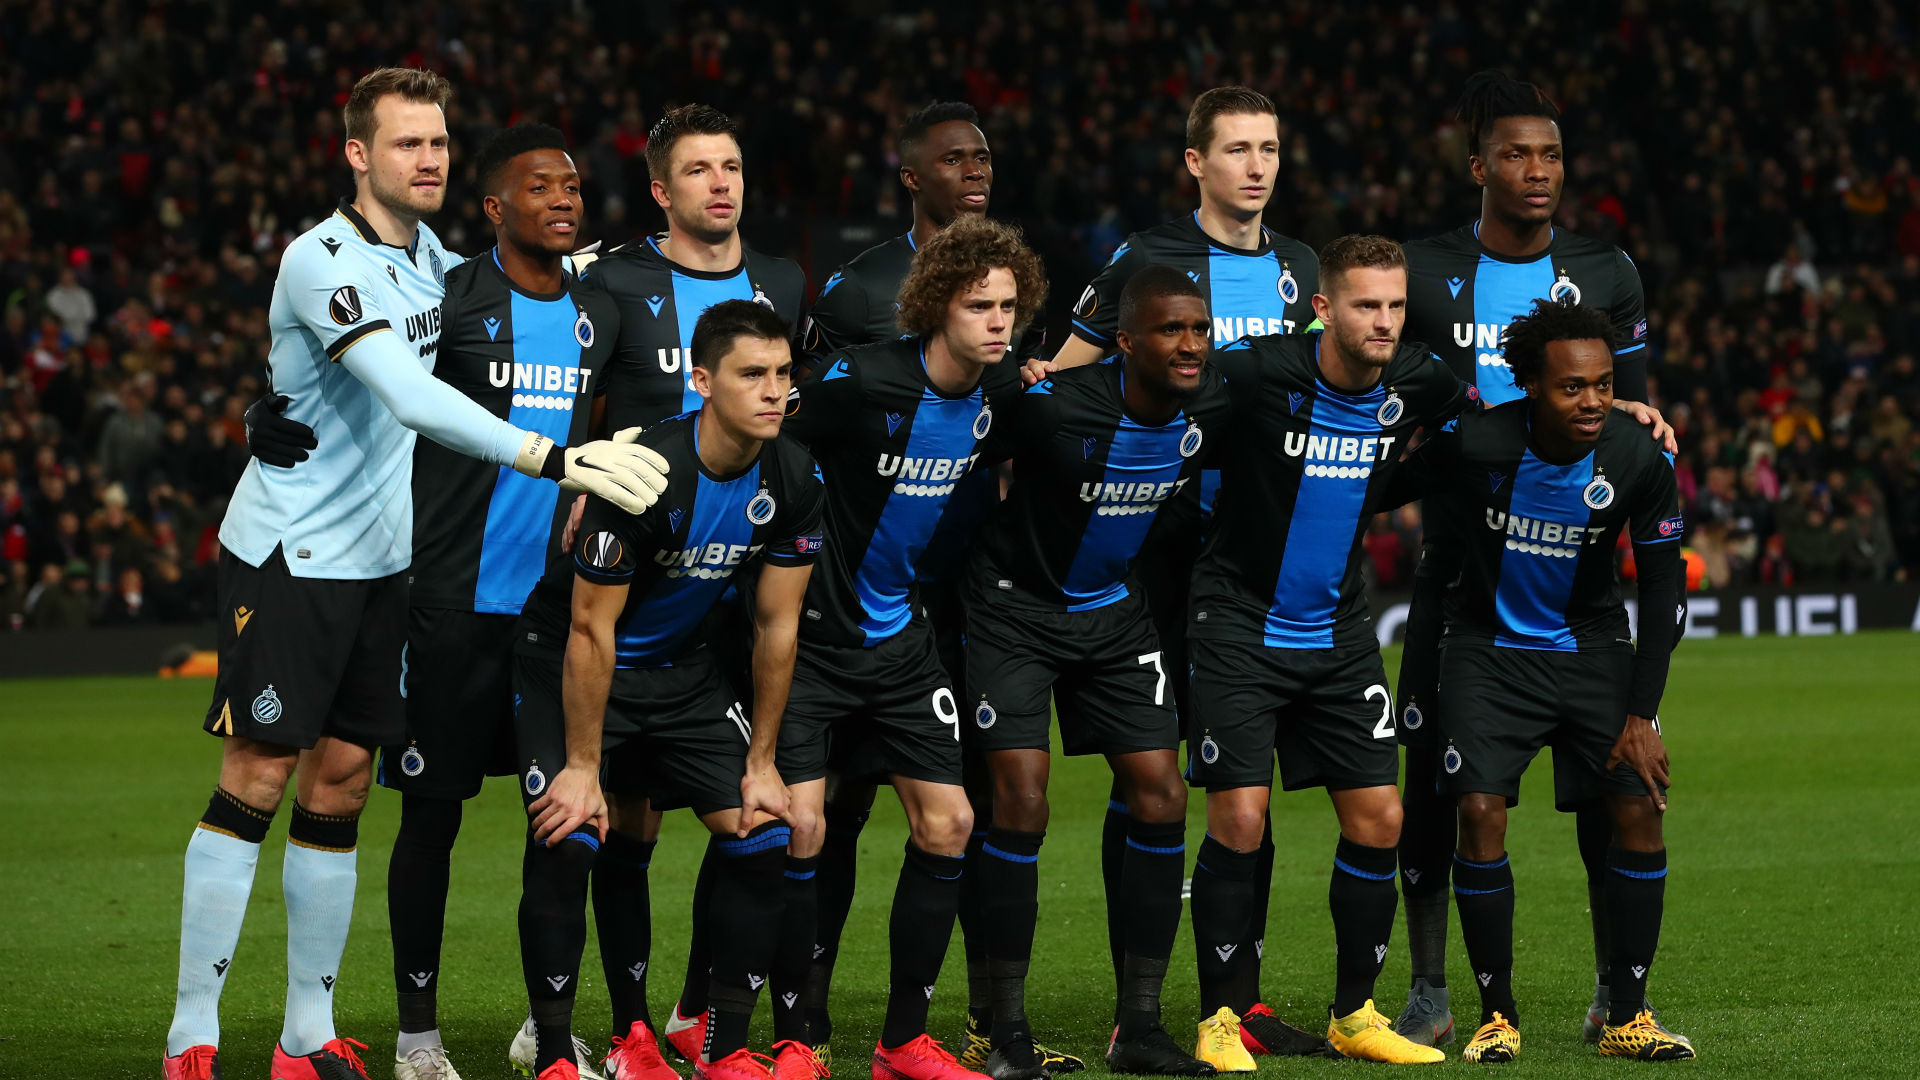 Belgium's Pro League is set to be cancelled due to coronavirus, with Club Brugge in line to be declared champions.